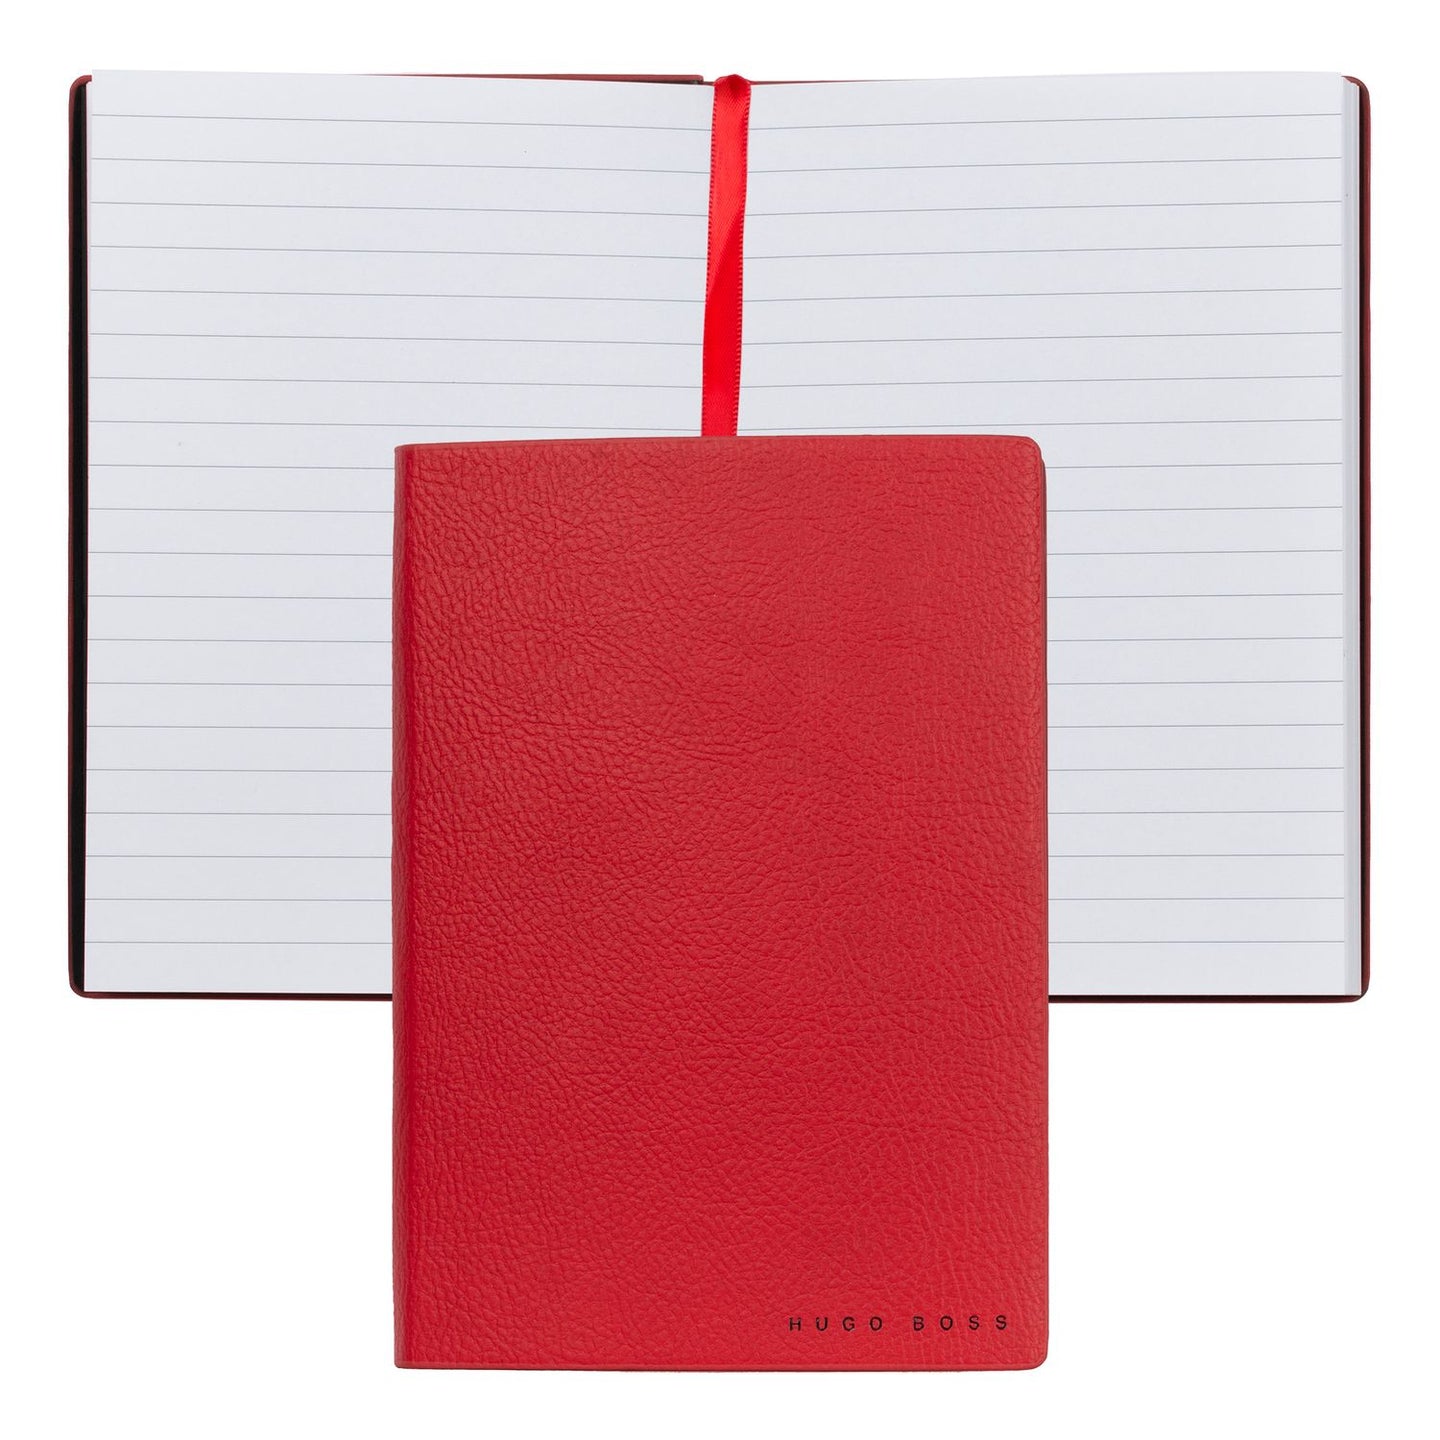 Hugo Boss Notizbuch A6 Essential Storyline Red Lined